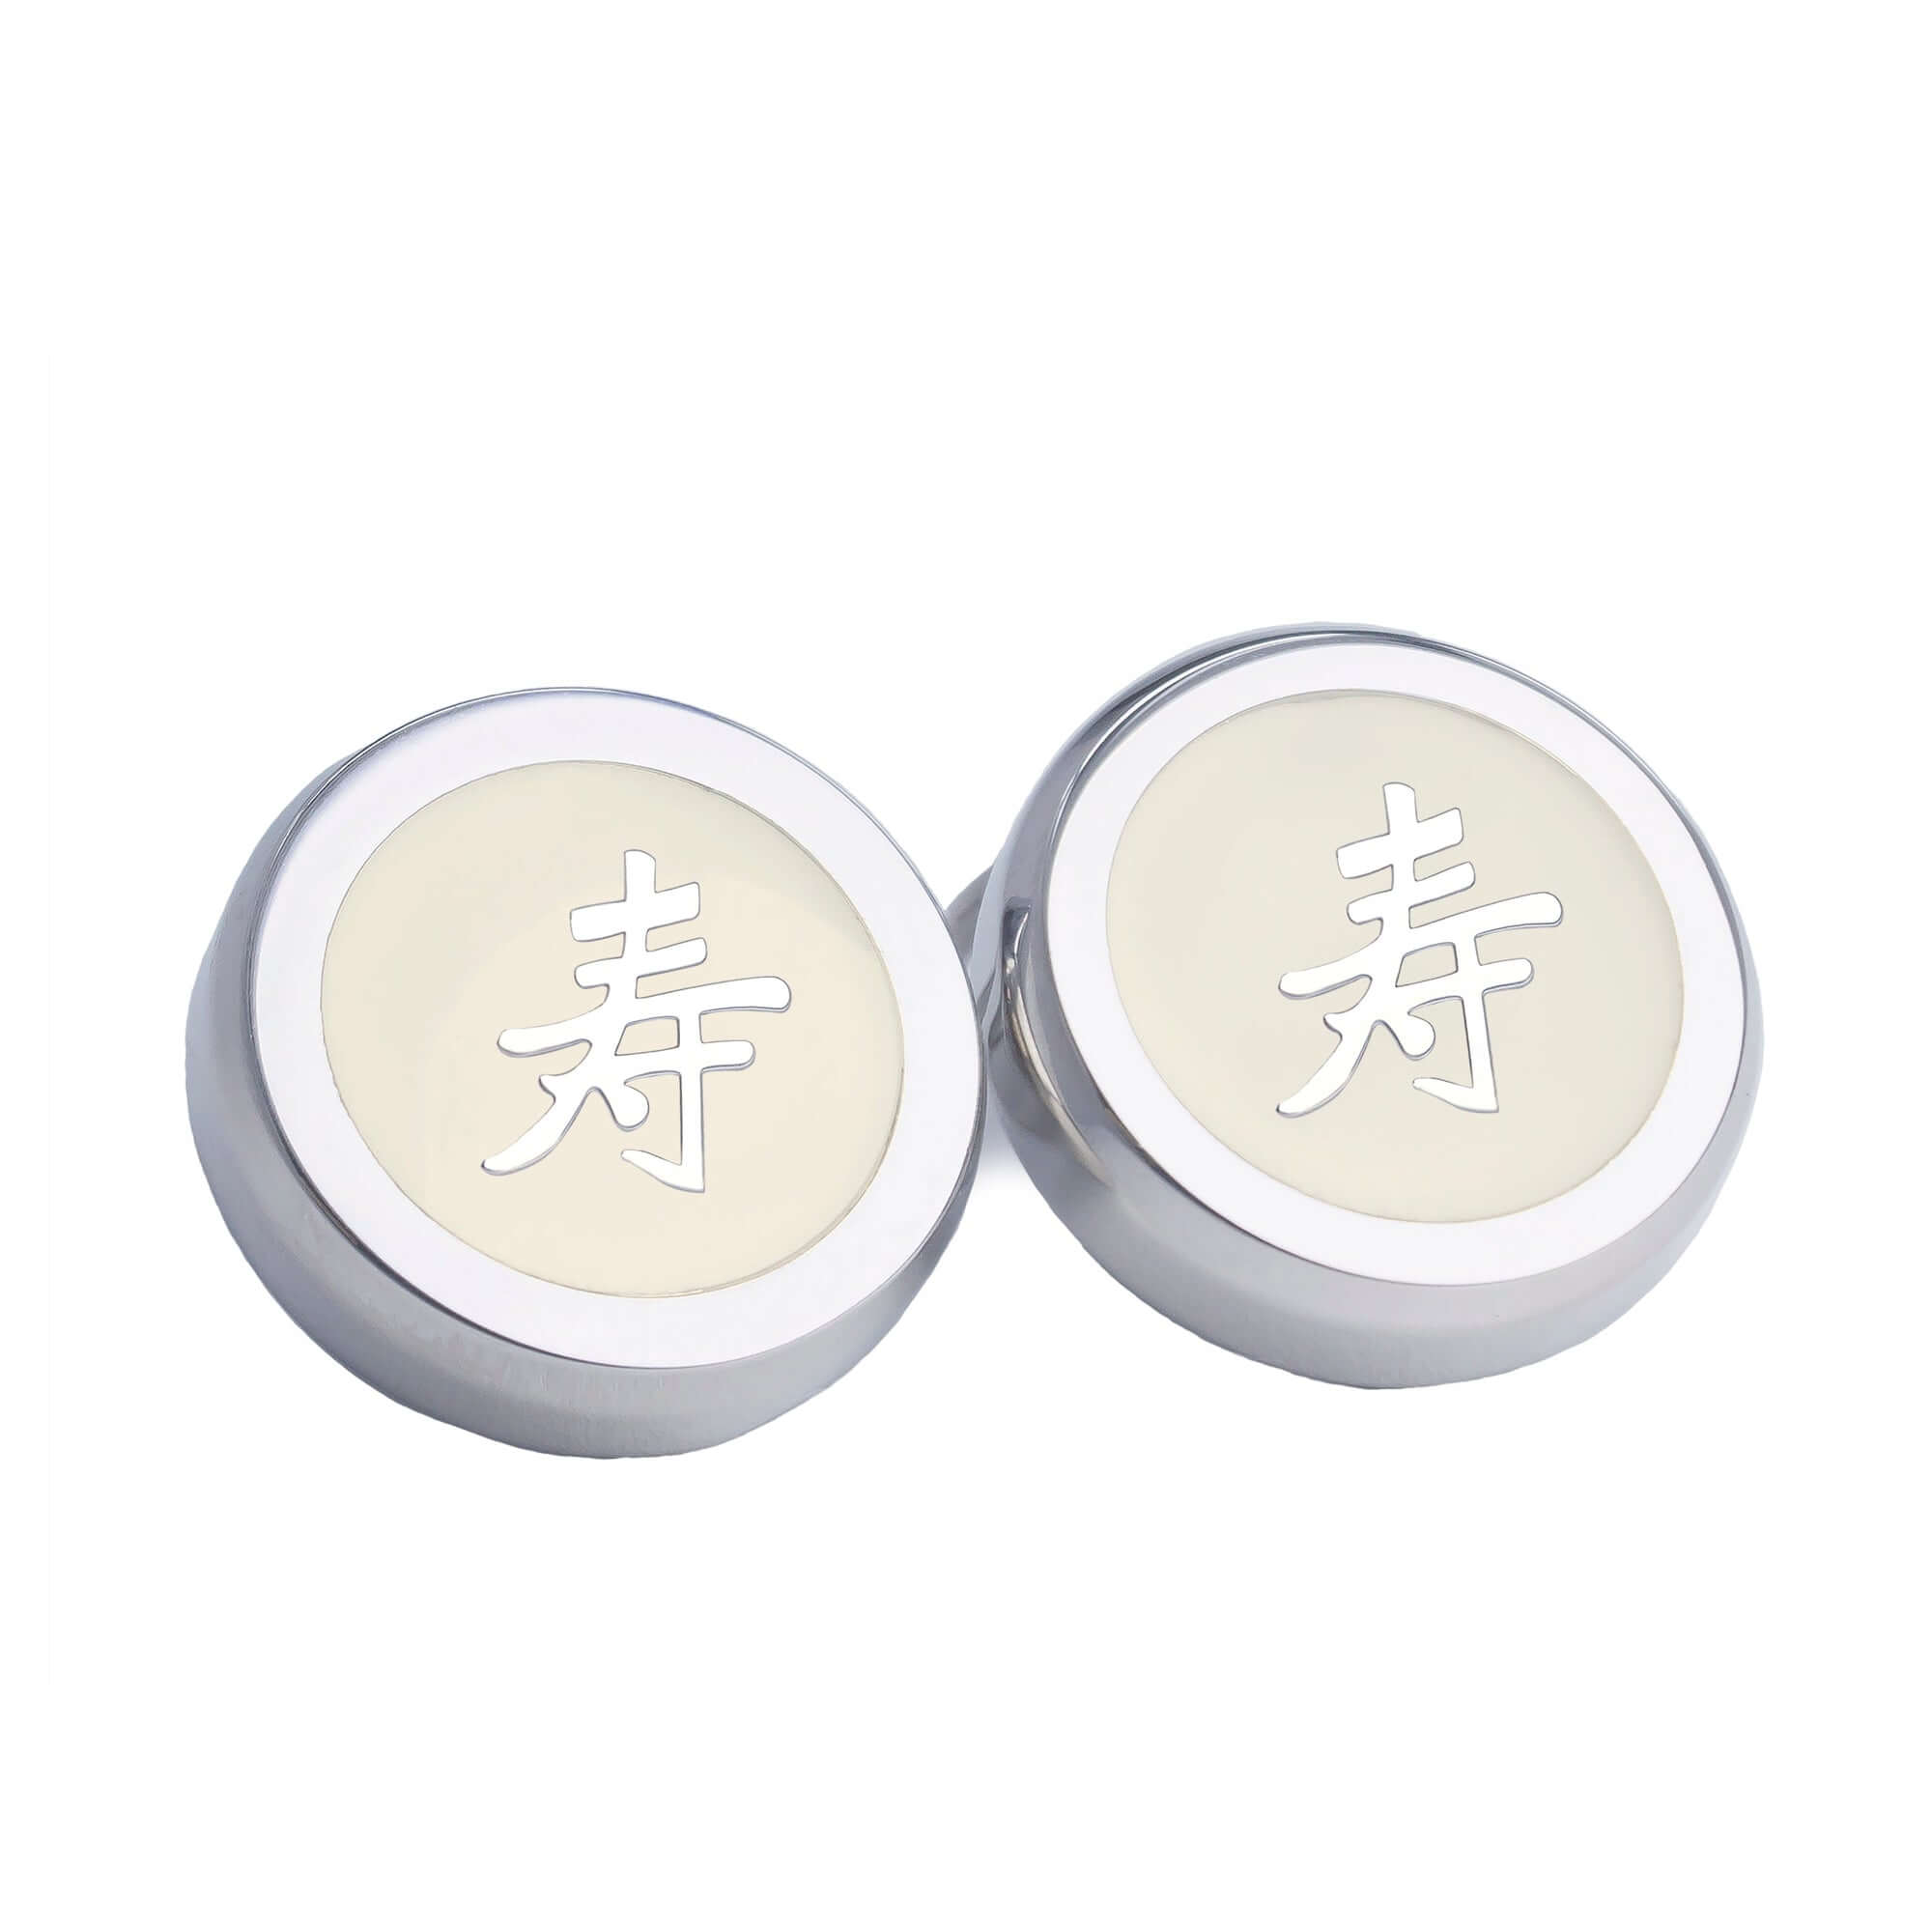 Chinese Character Silver Button Covers-Button Covers-A.Azthom-寿 Shou-Cufflinks.com.sg